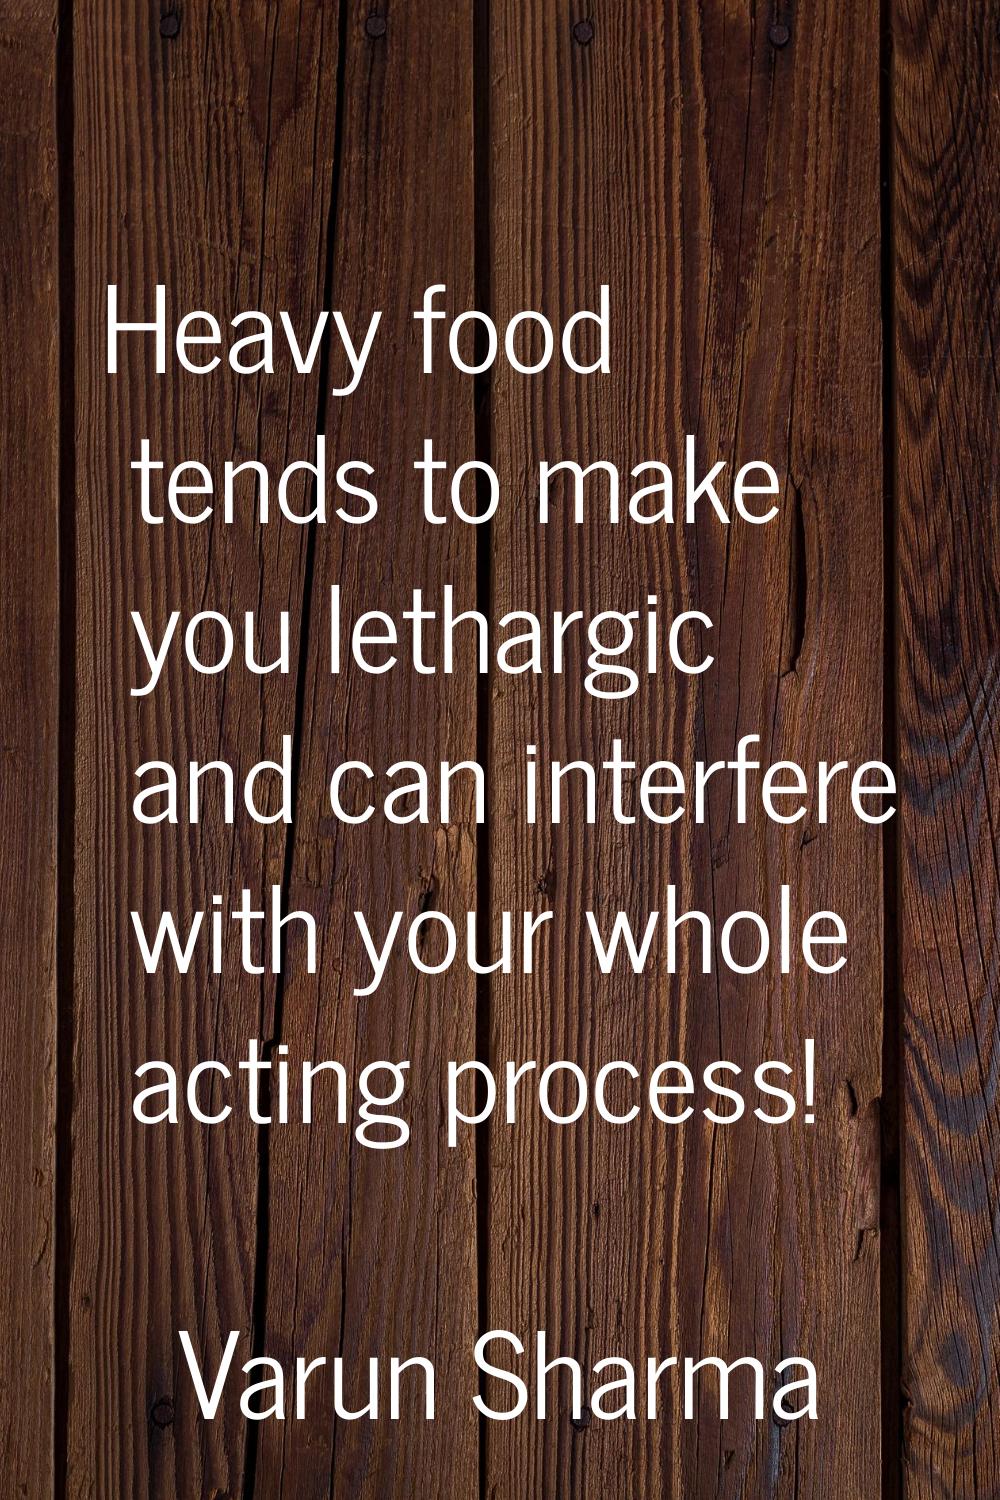 Heavy food tends to make you lethargic and can interfere with your whole acting process!